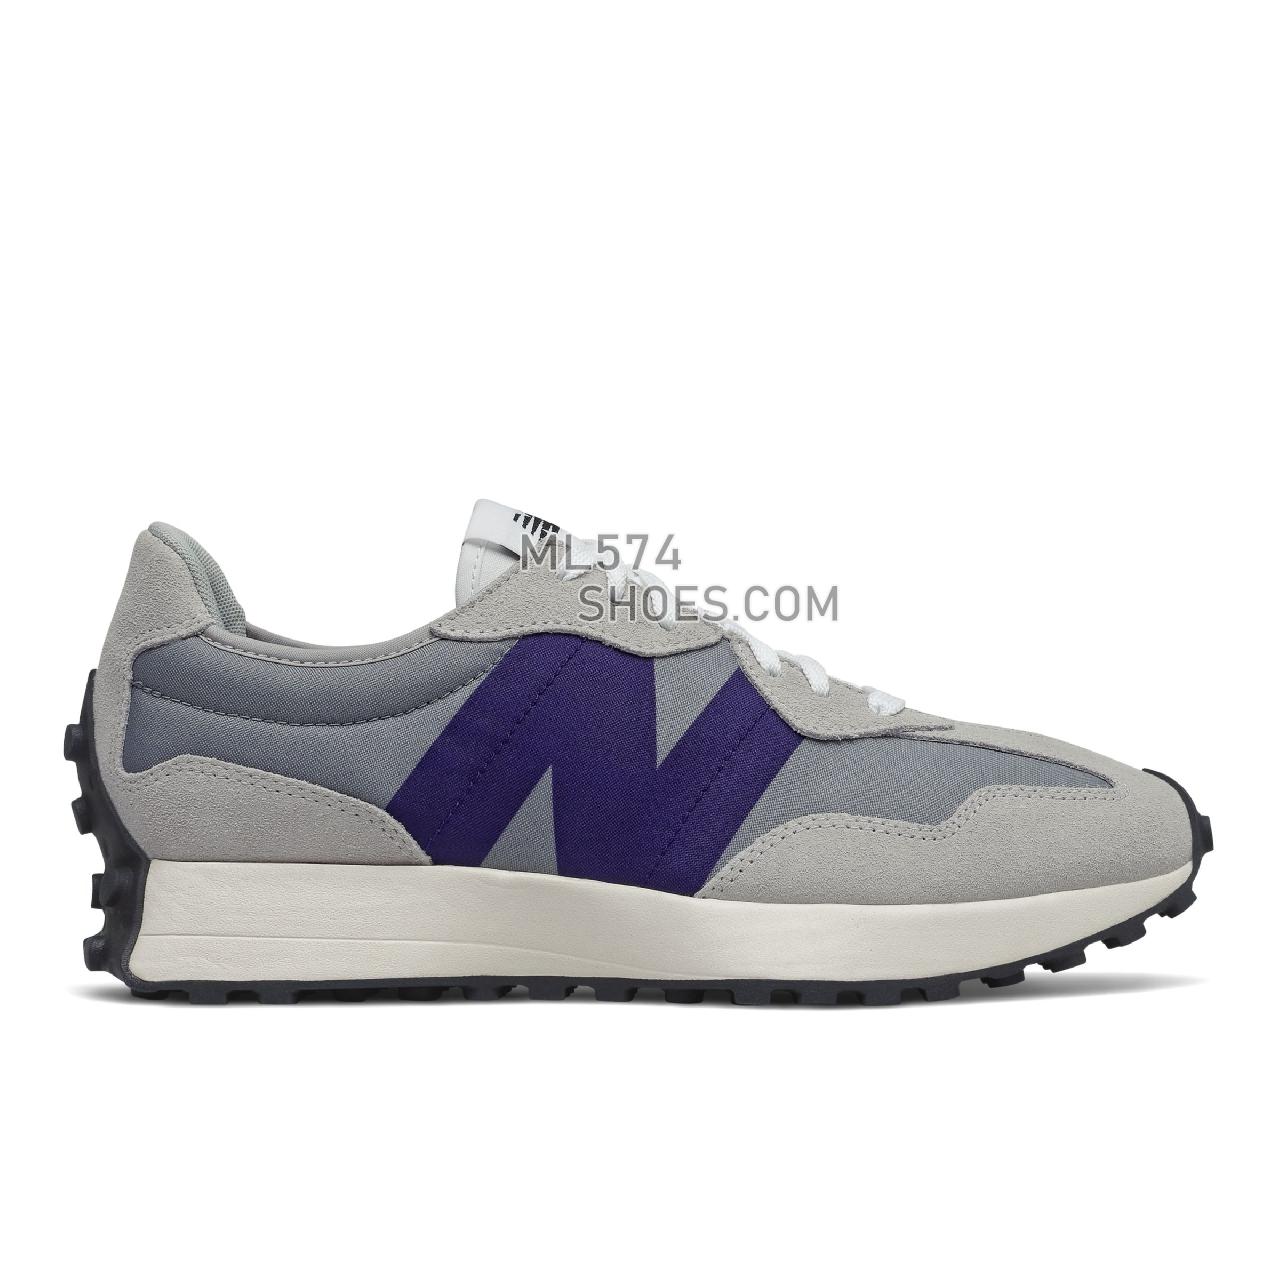 New Balance 327 - Men's Sport Style Sneakers - Rain Cloud with Virtual Violet - MS327FC